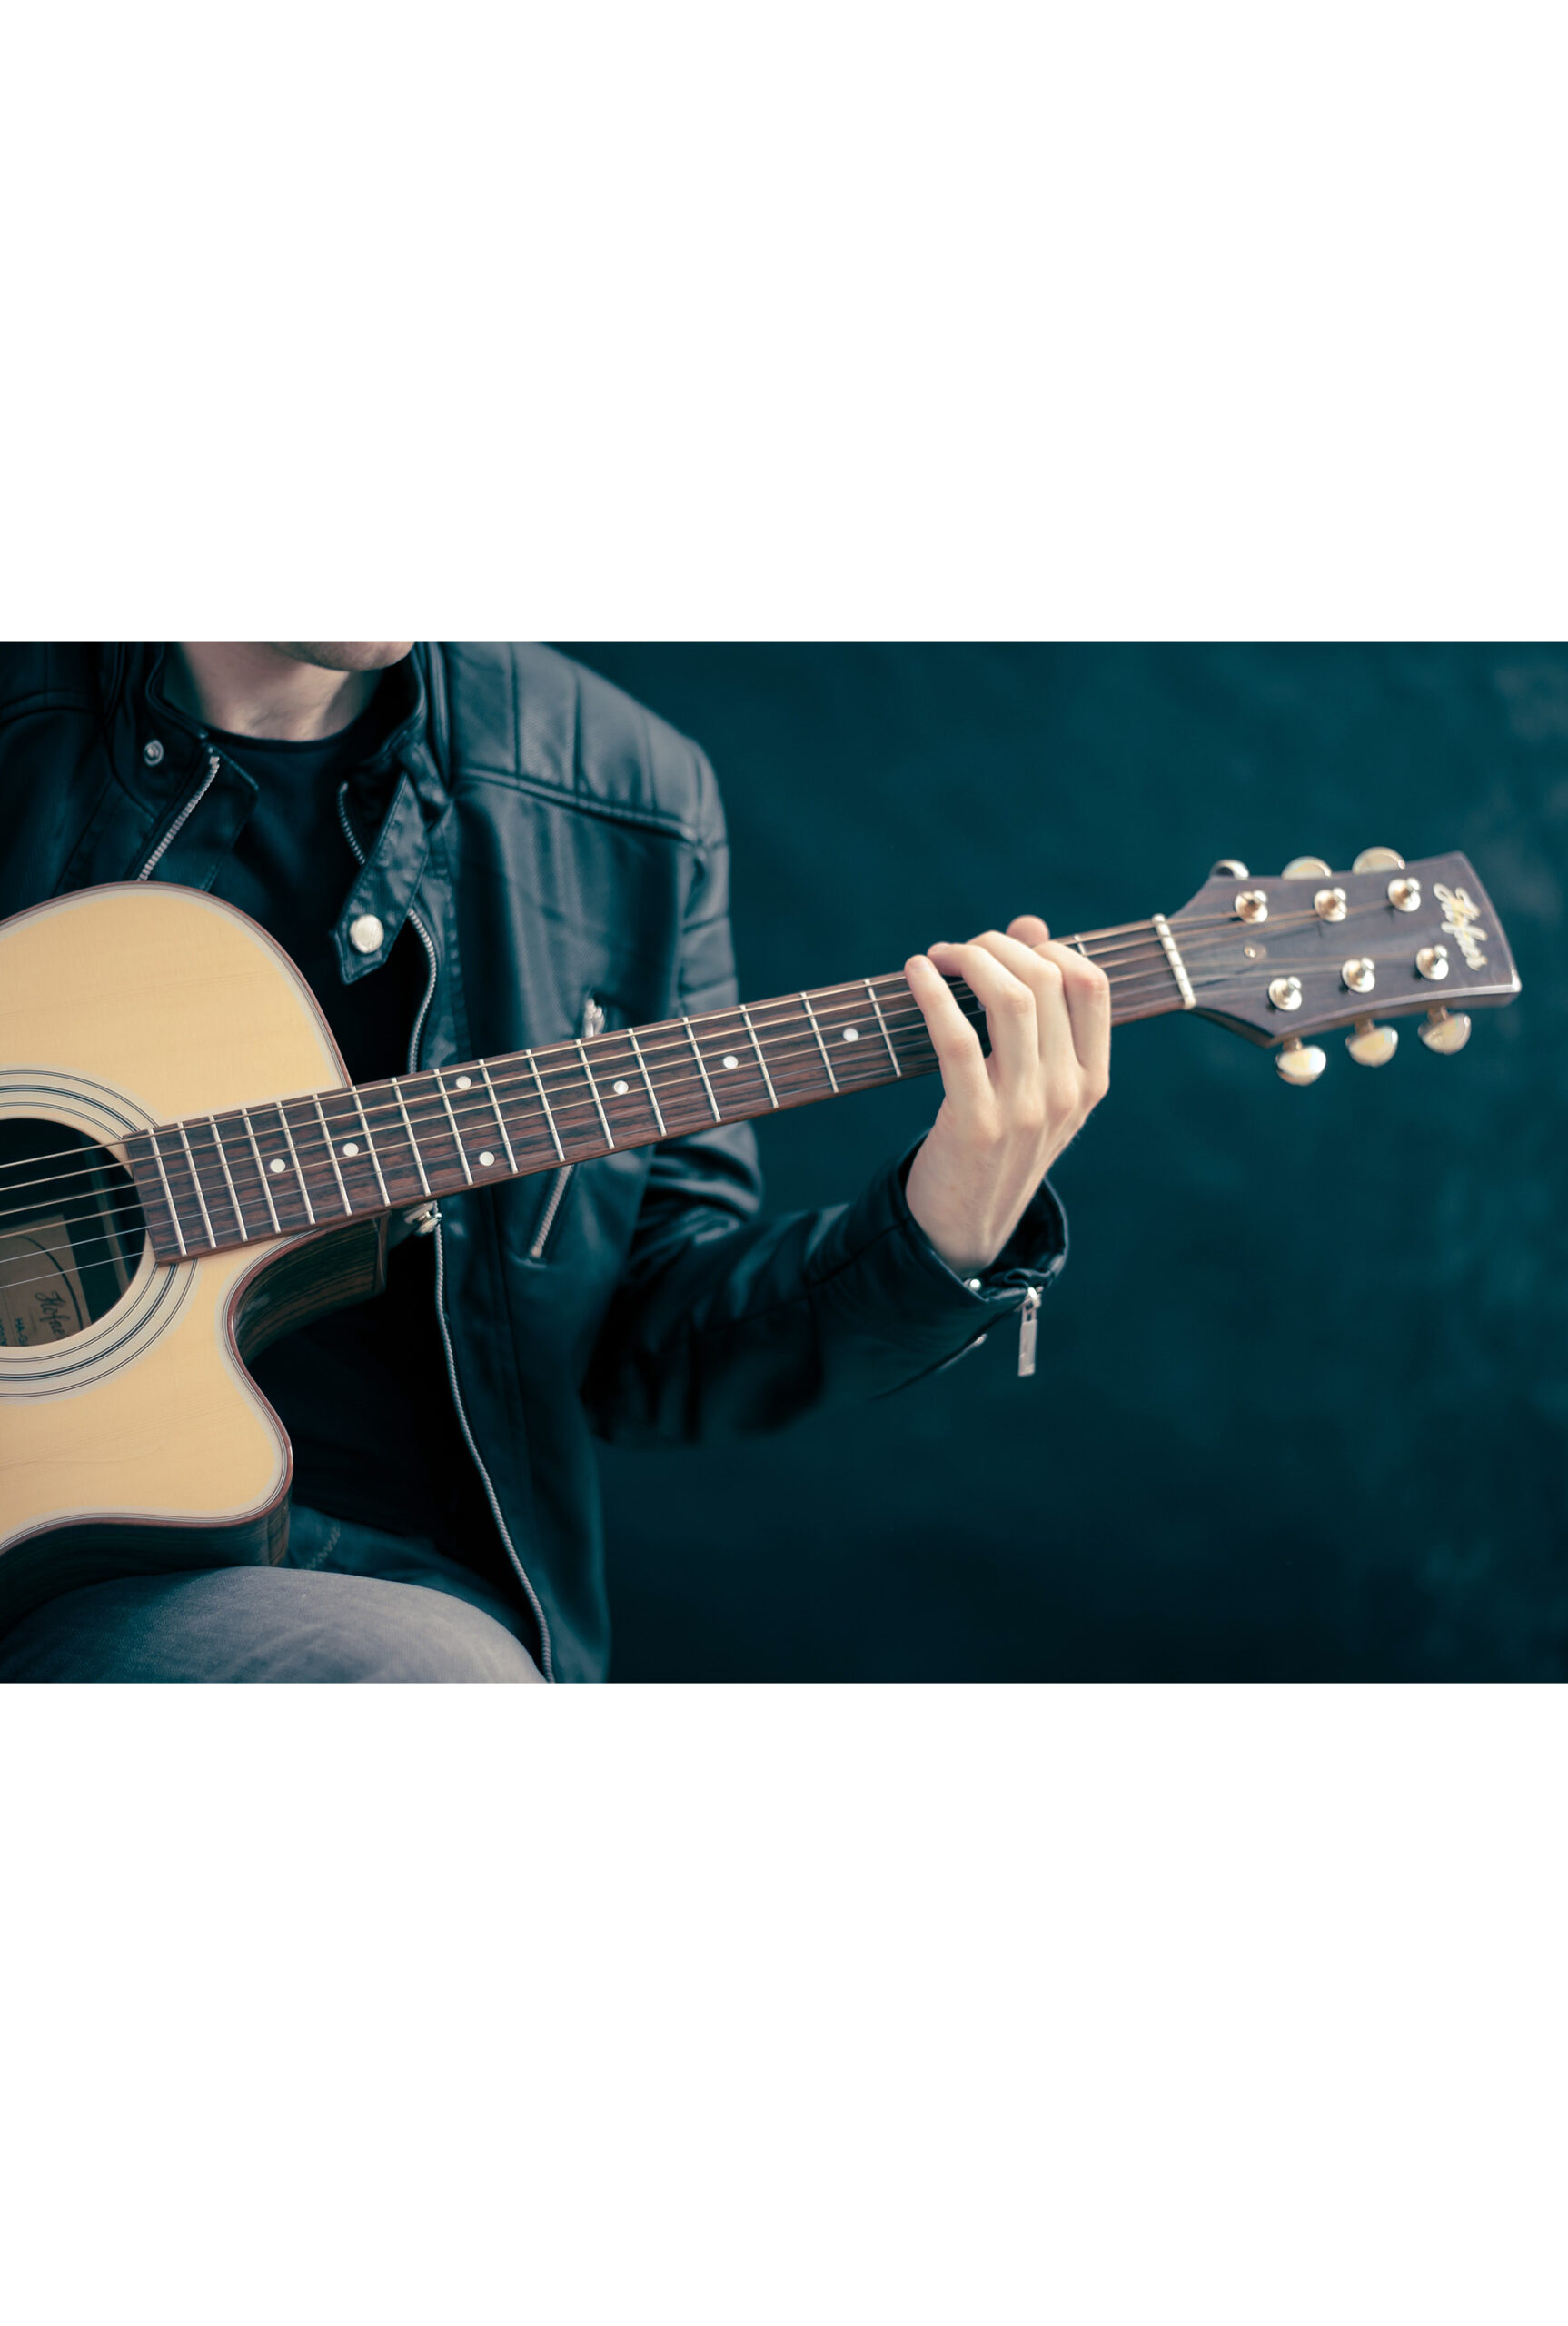 Become the best acoustic guitar player you can be!